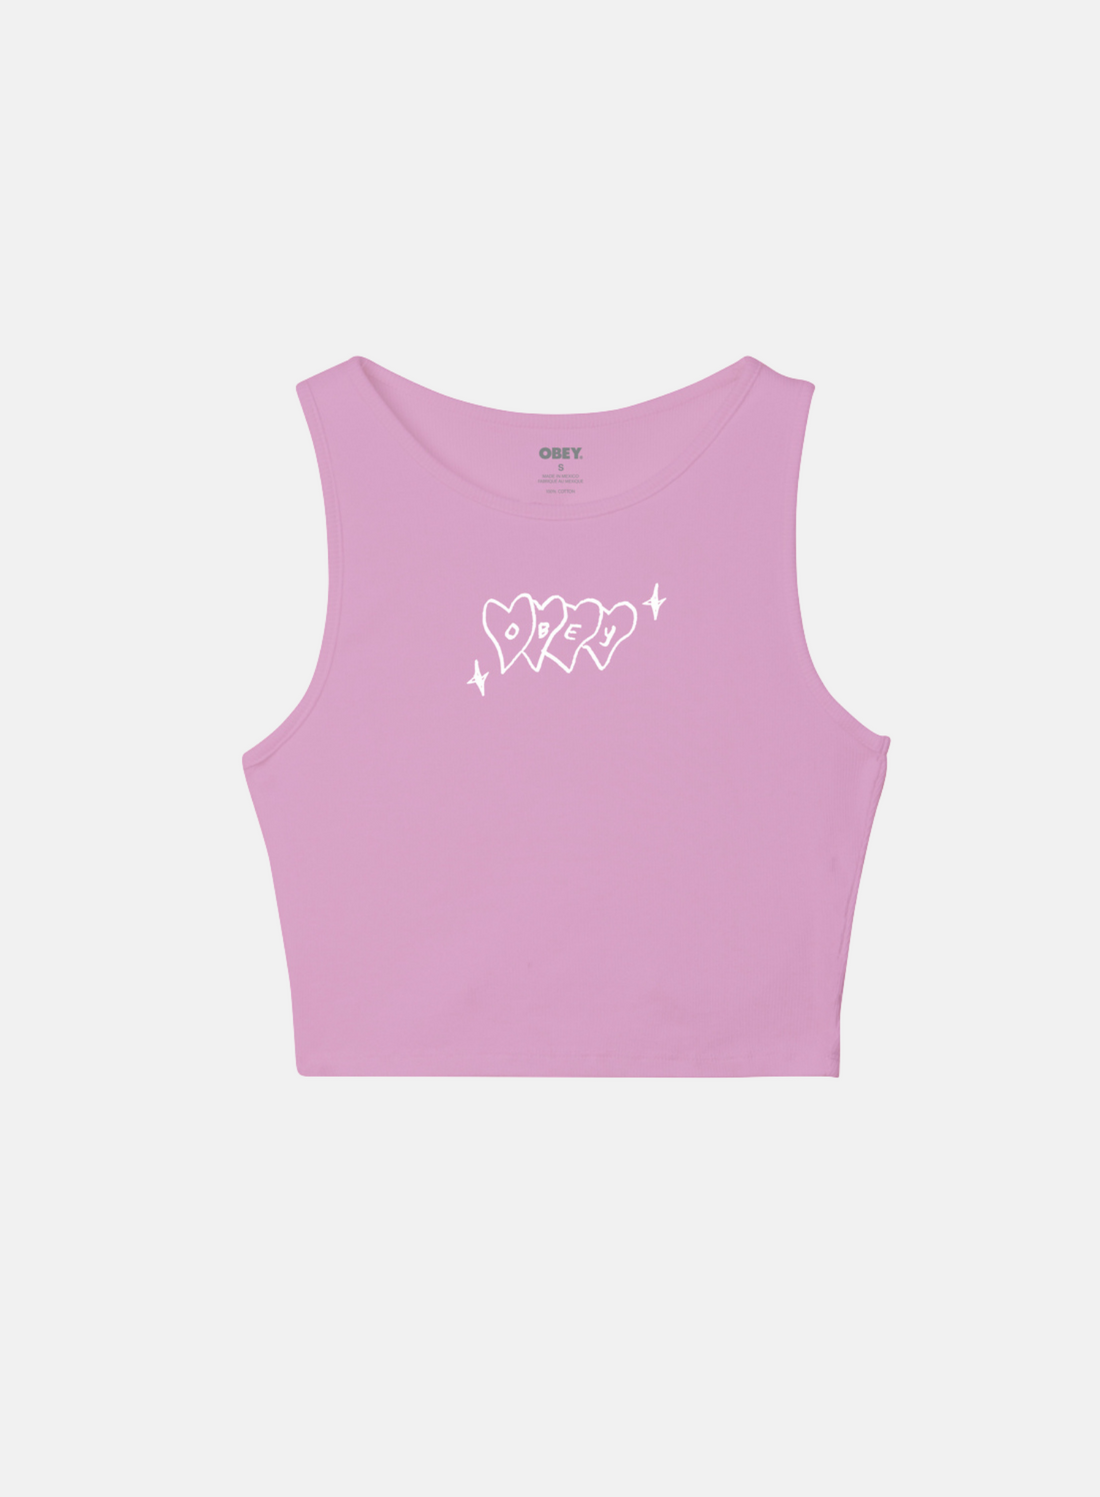 OBEY Hearts Top Pink - Hympala Store 